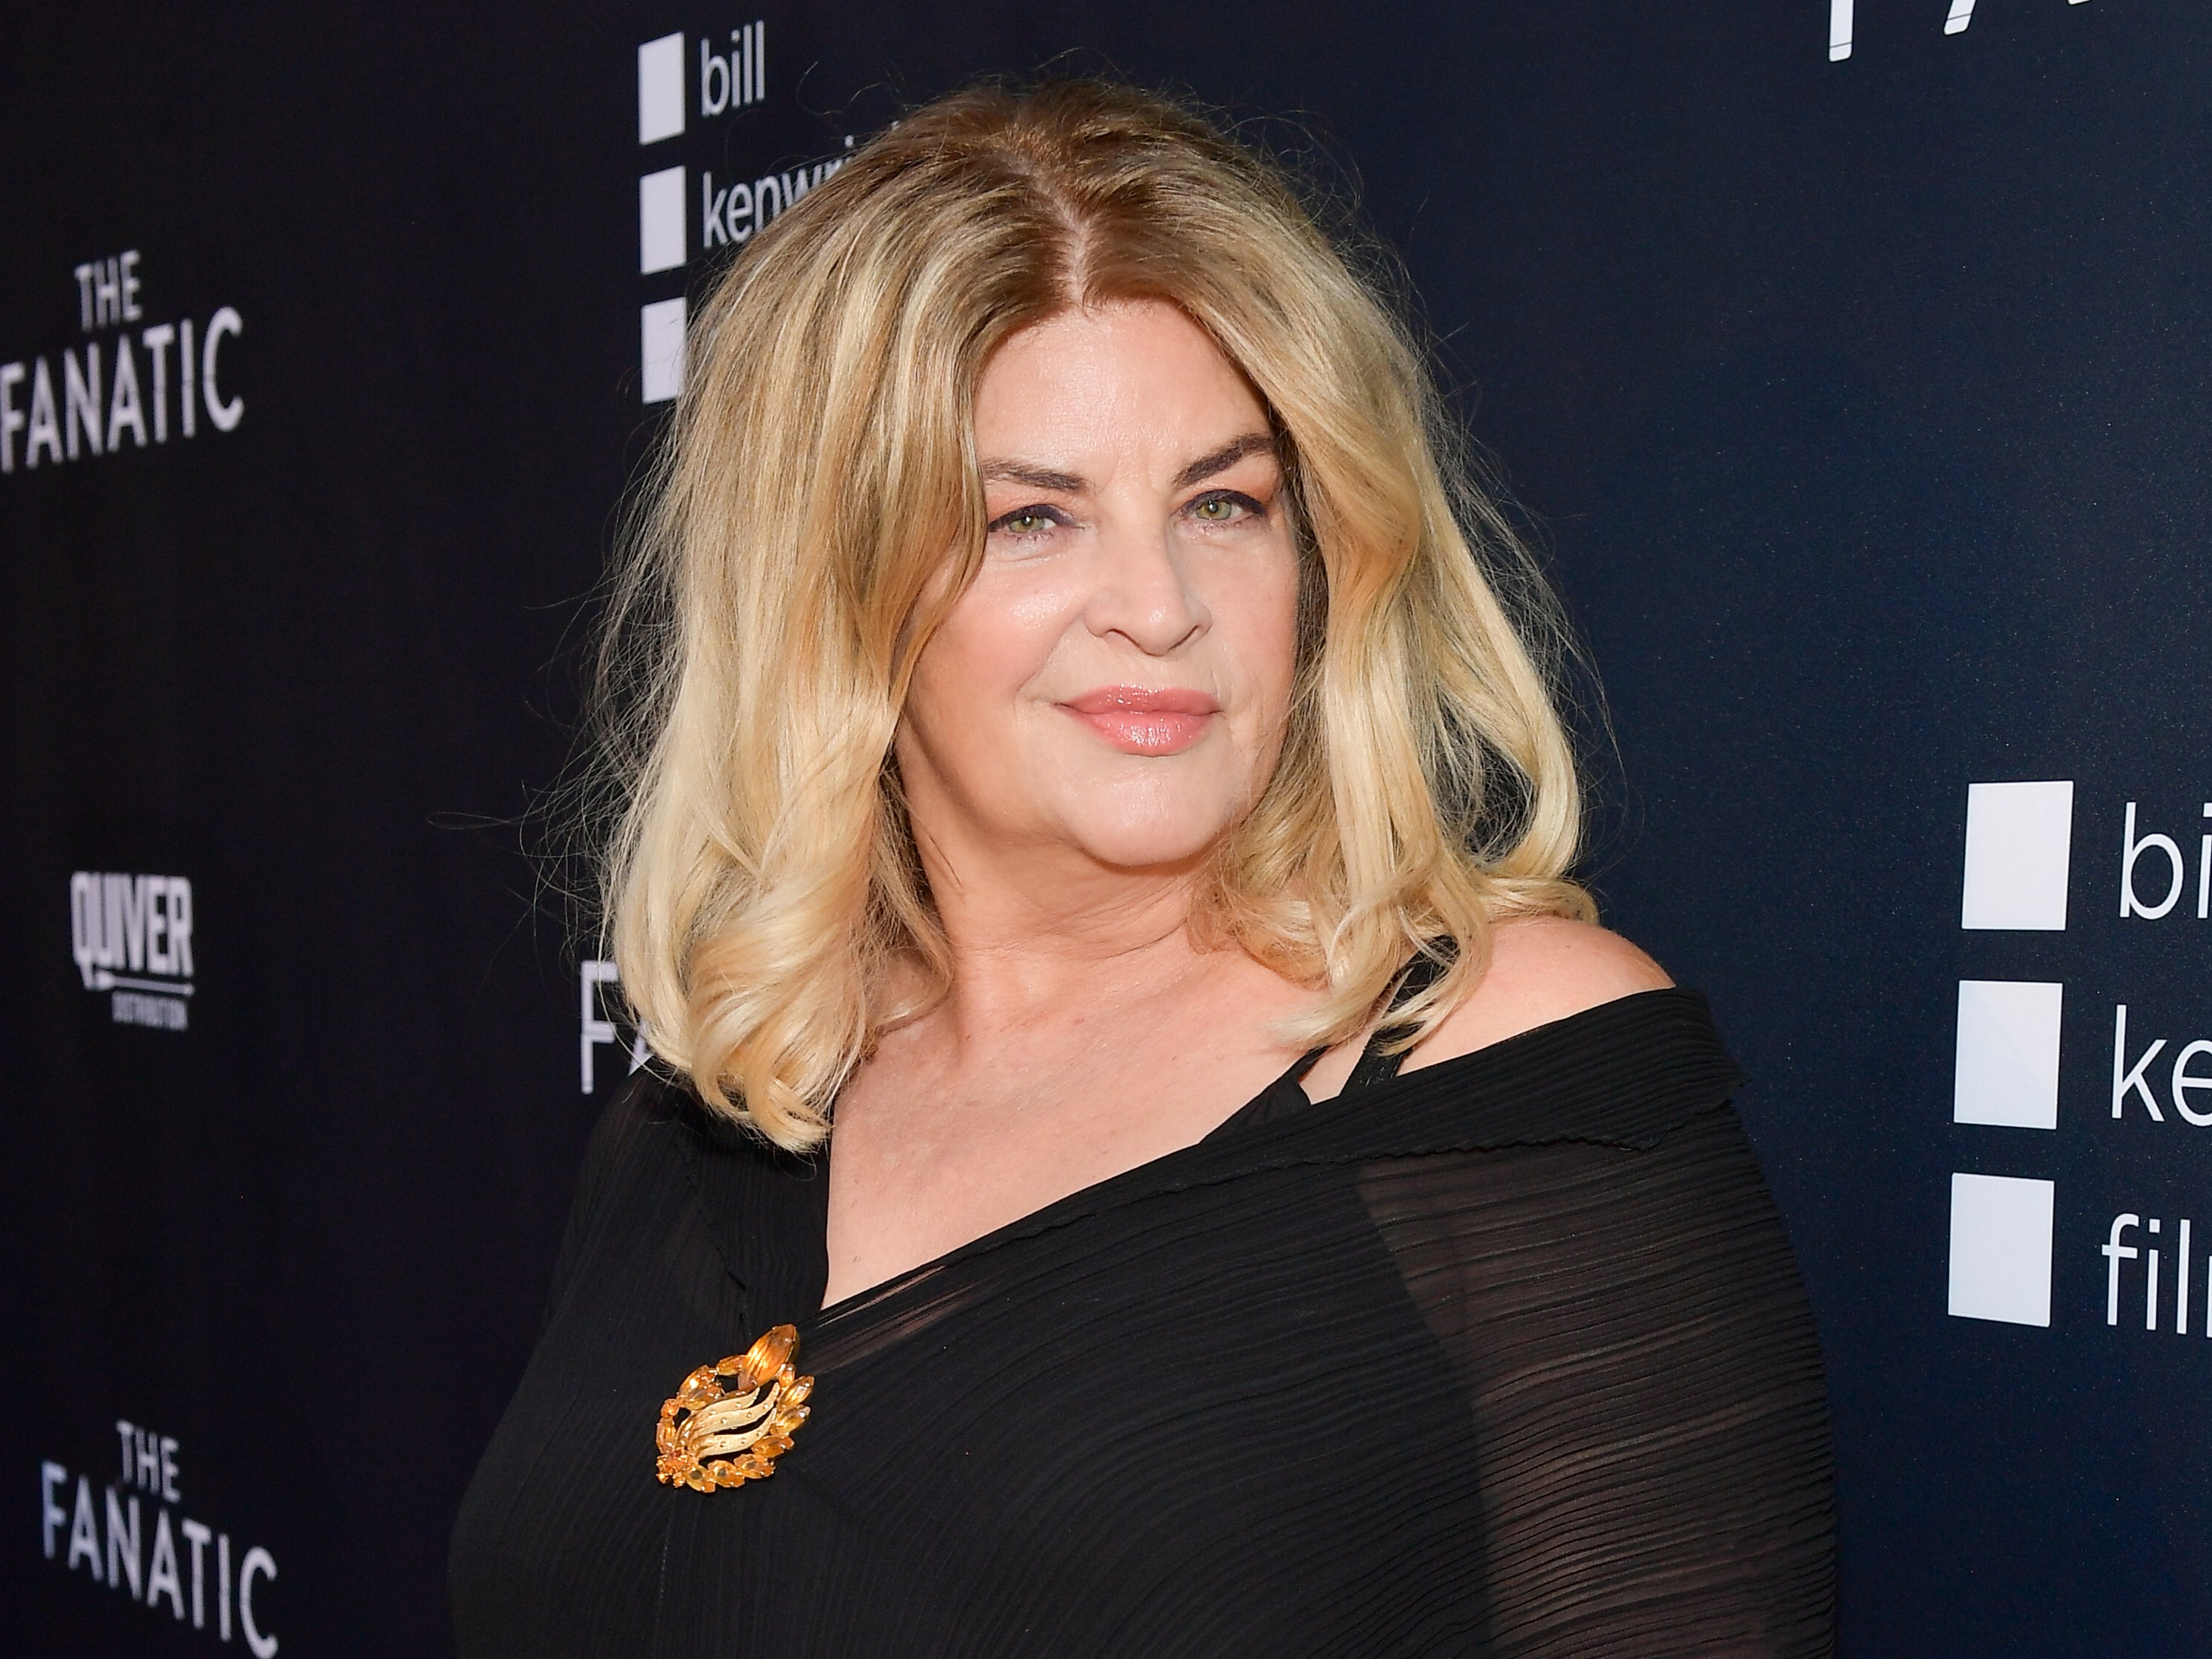 Kirstie Alley attends the premiere of ‘The Fanatic’ on 22 August 2019 in Hollywood, California